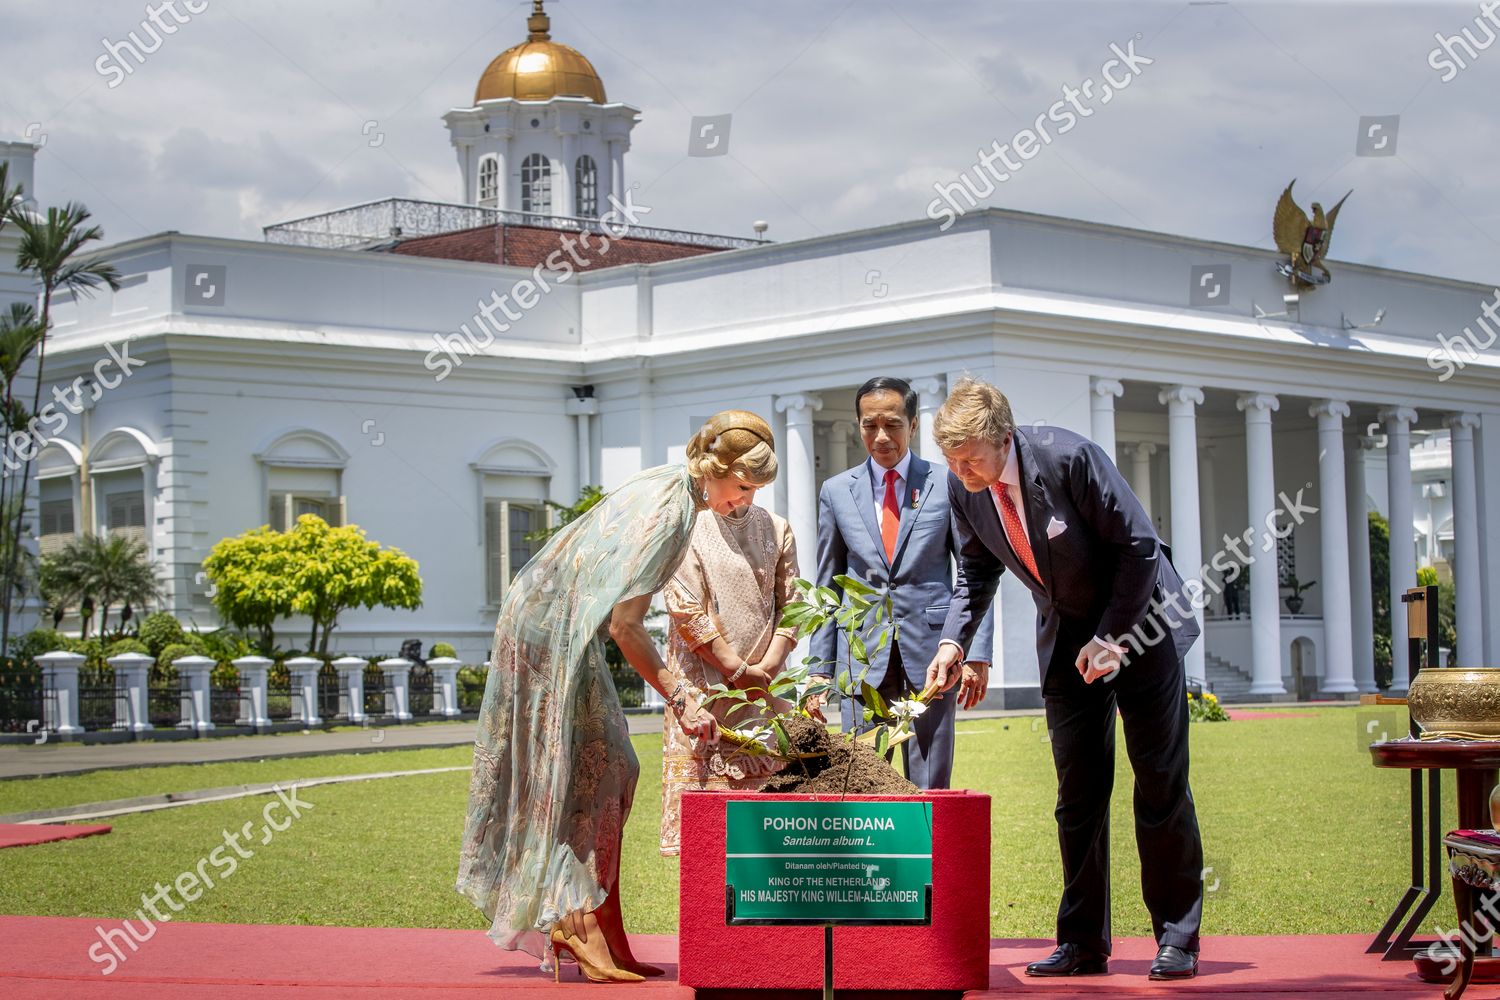 dutch-royals-visit-to-indonesia-shutterstock-editorial-10578533ad.jpg